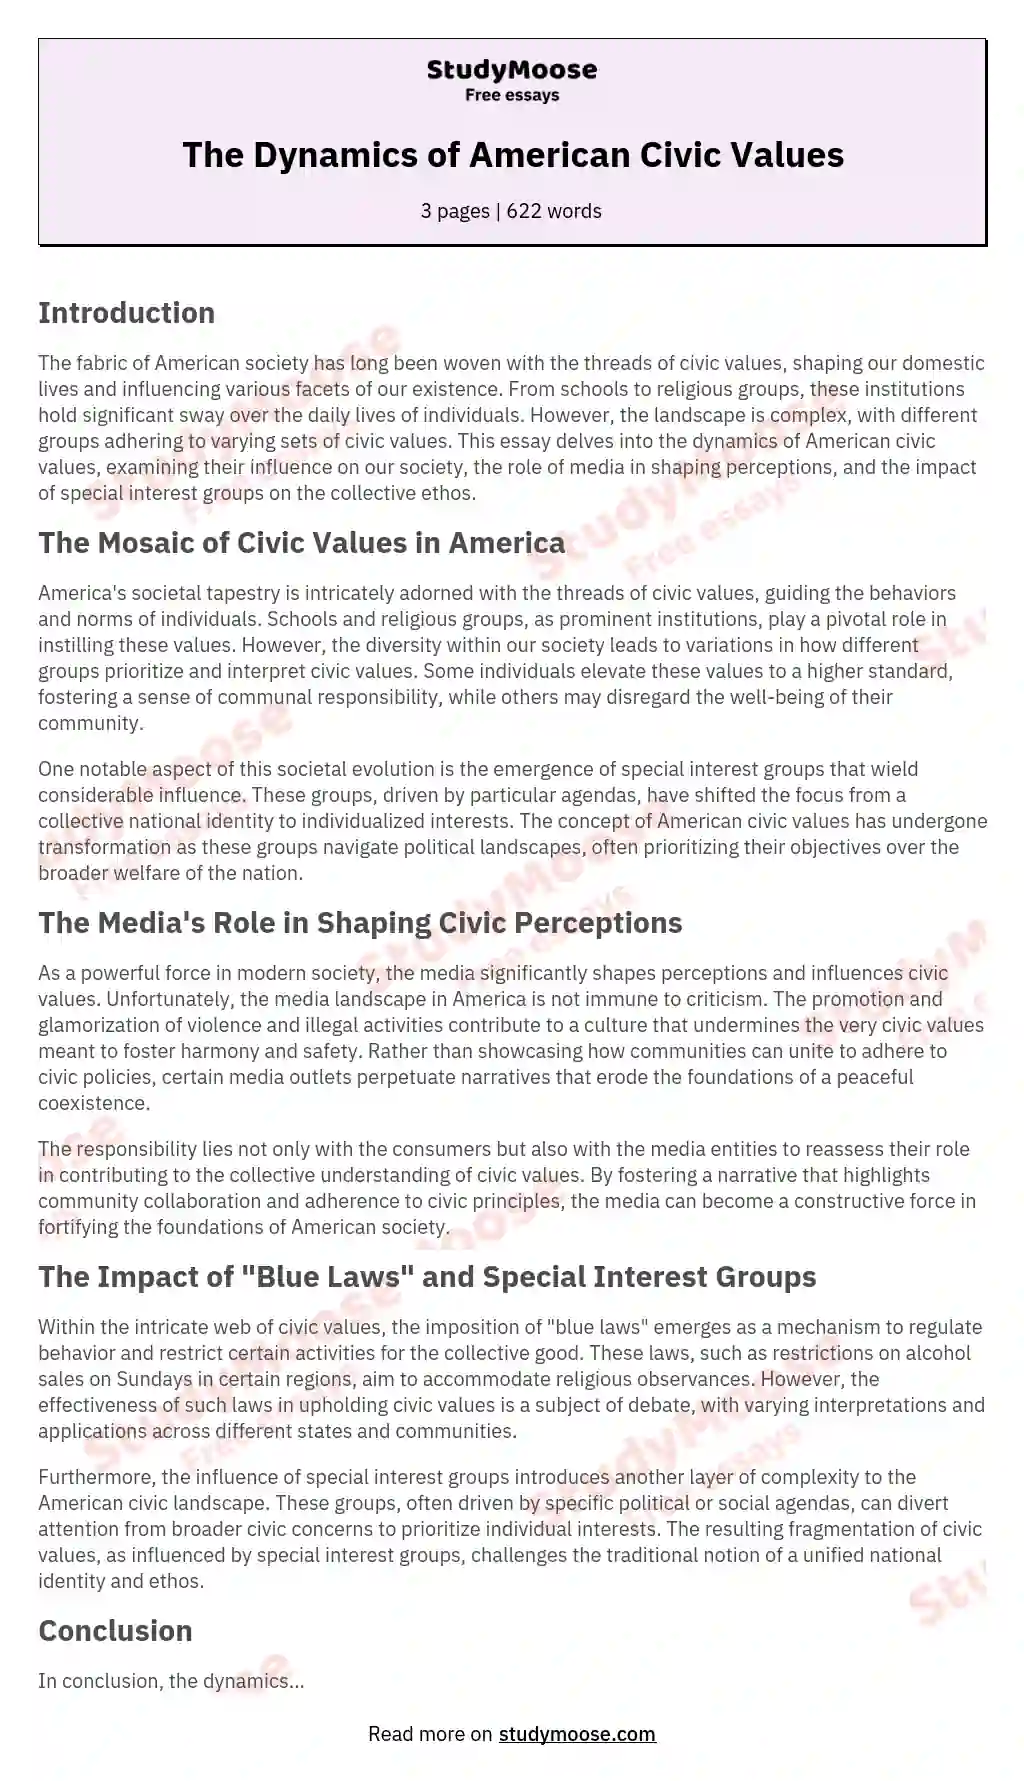 The Dynamics of American Civic Values essay